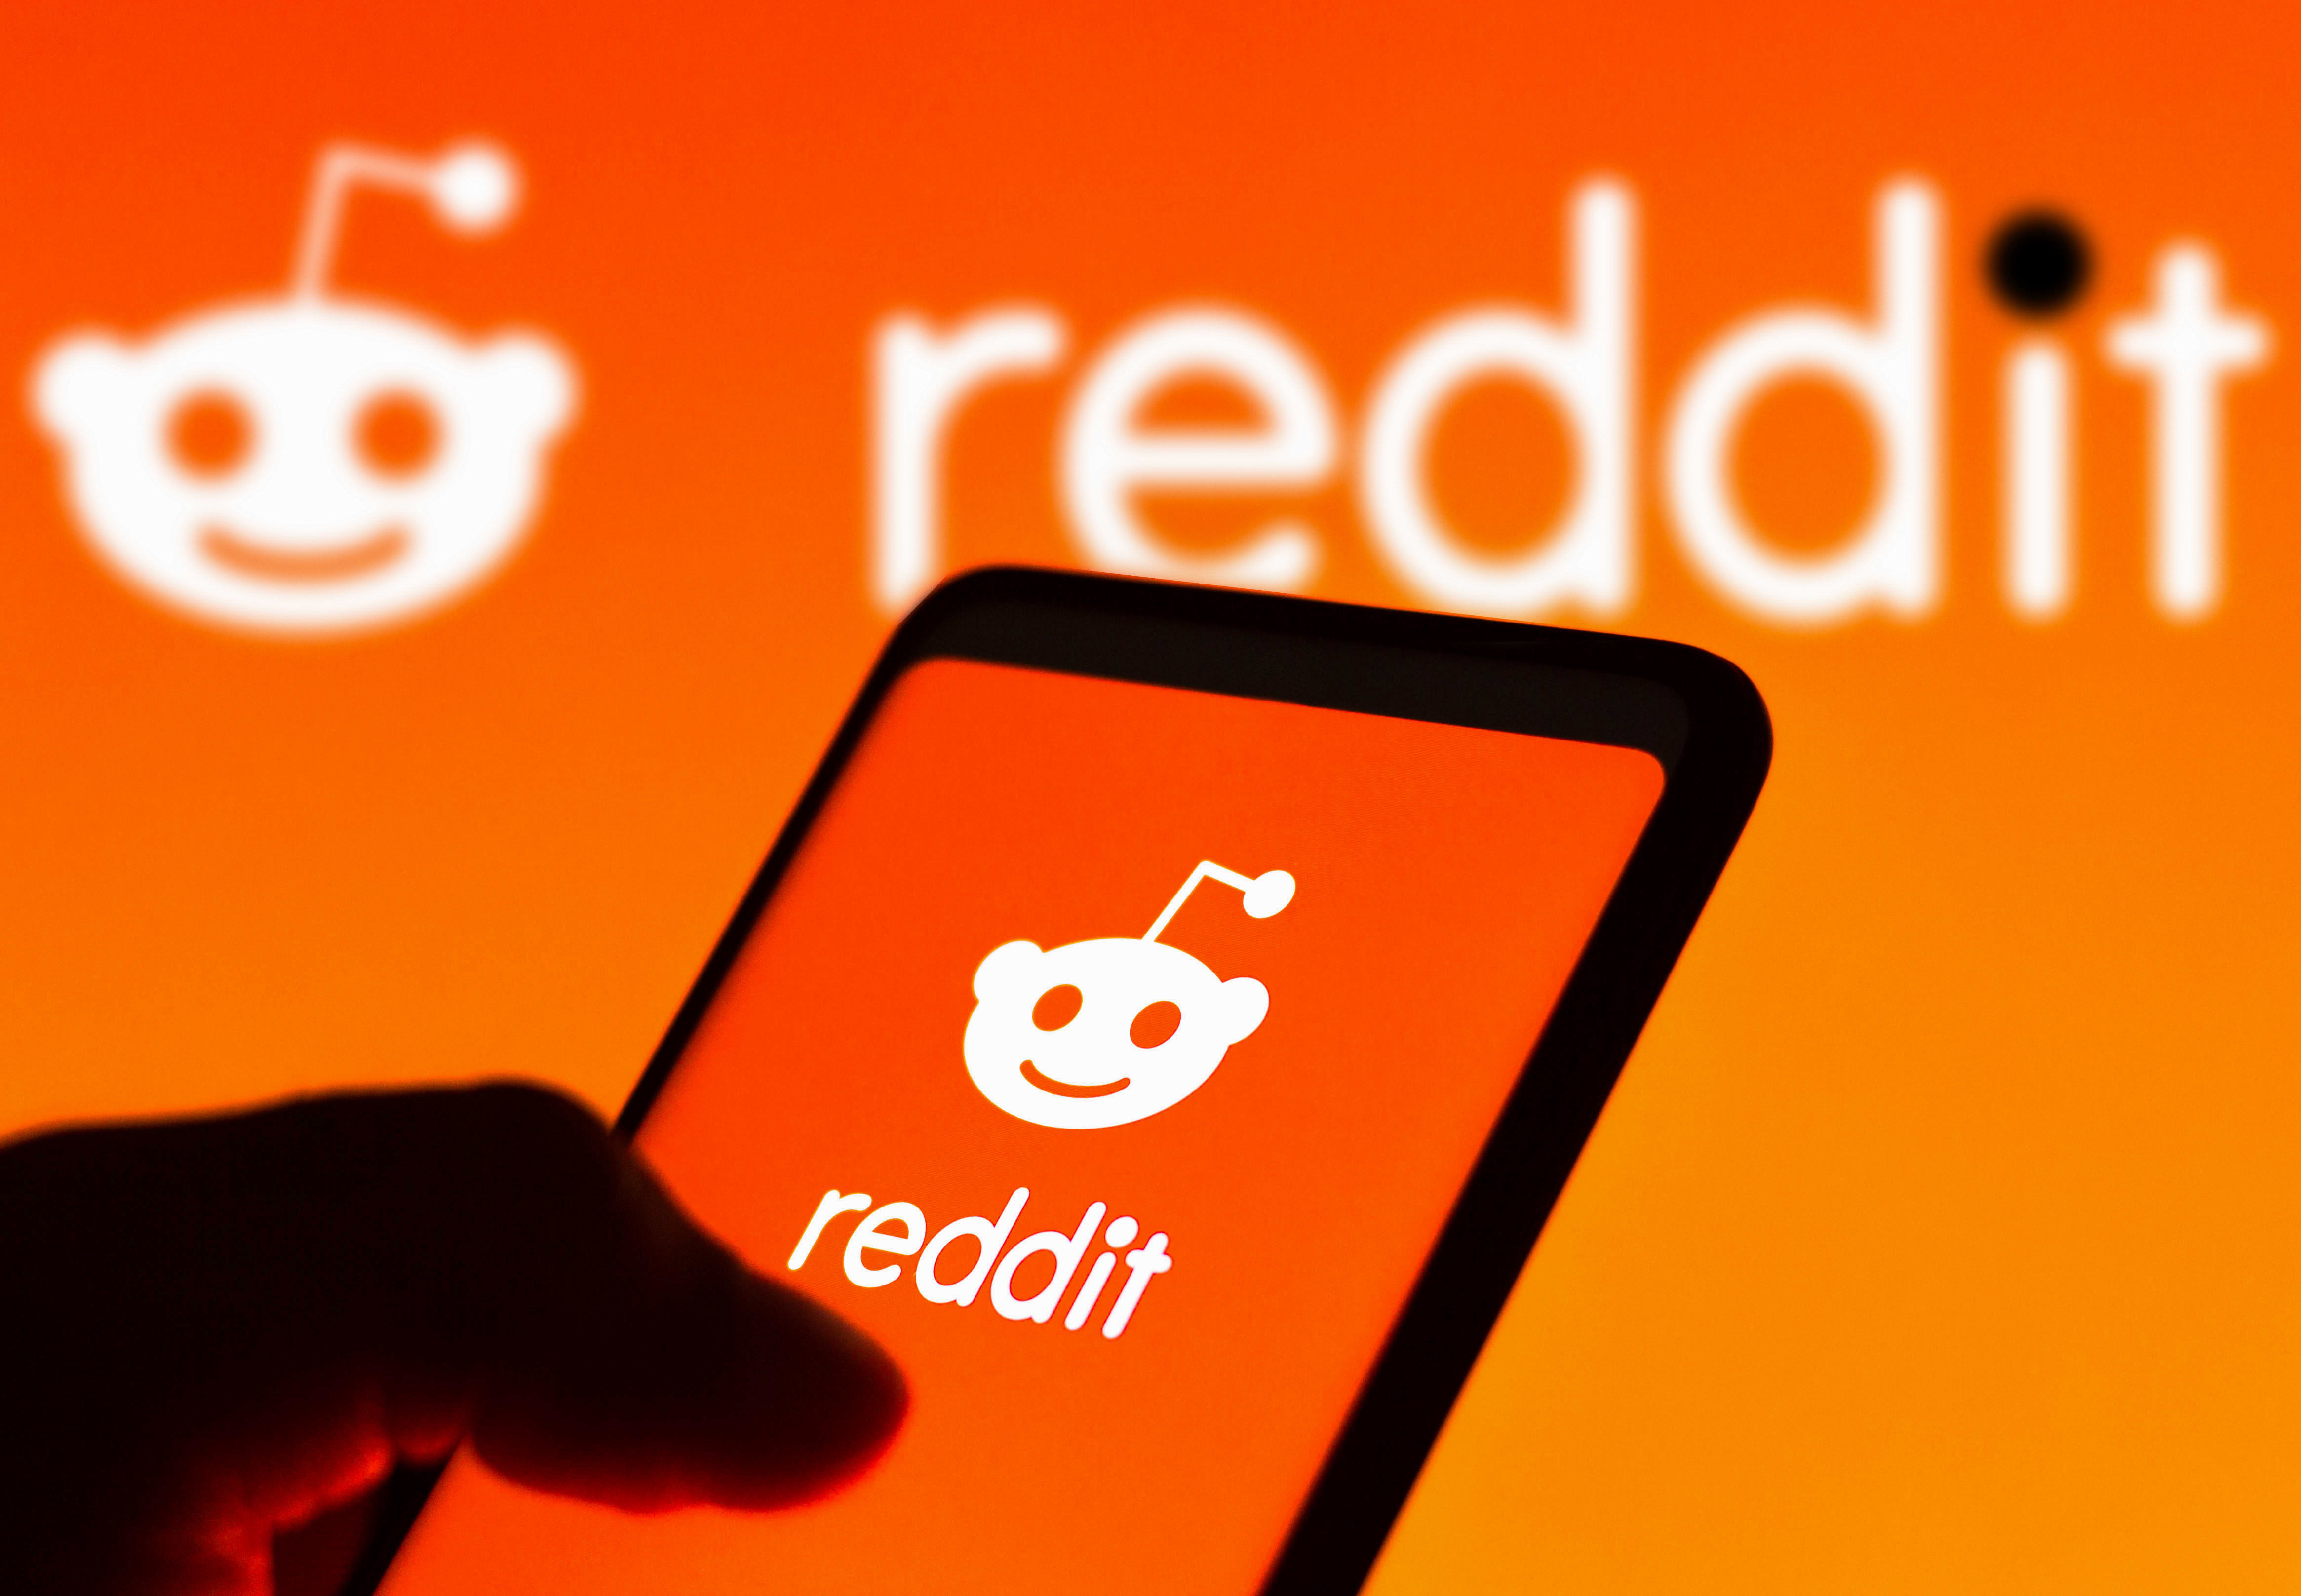 Reddit launches IPO with $748 million target - All you need to know